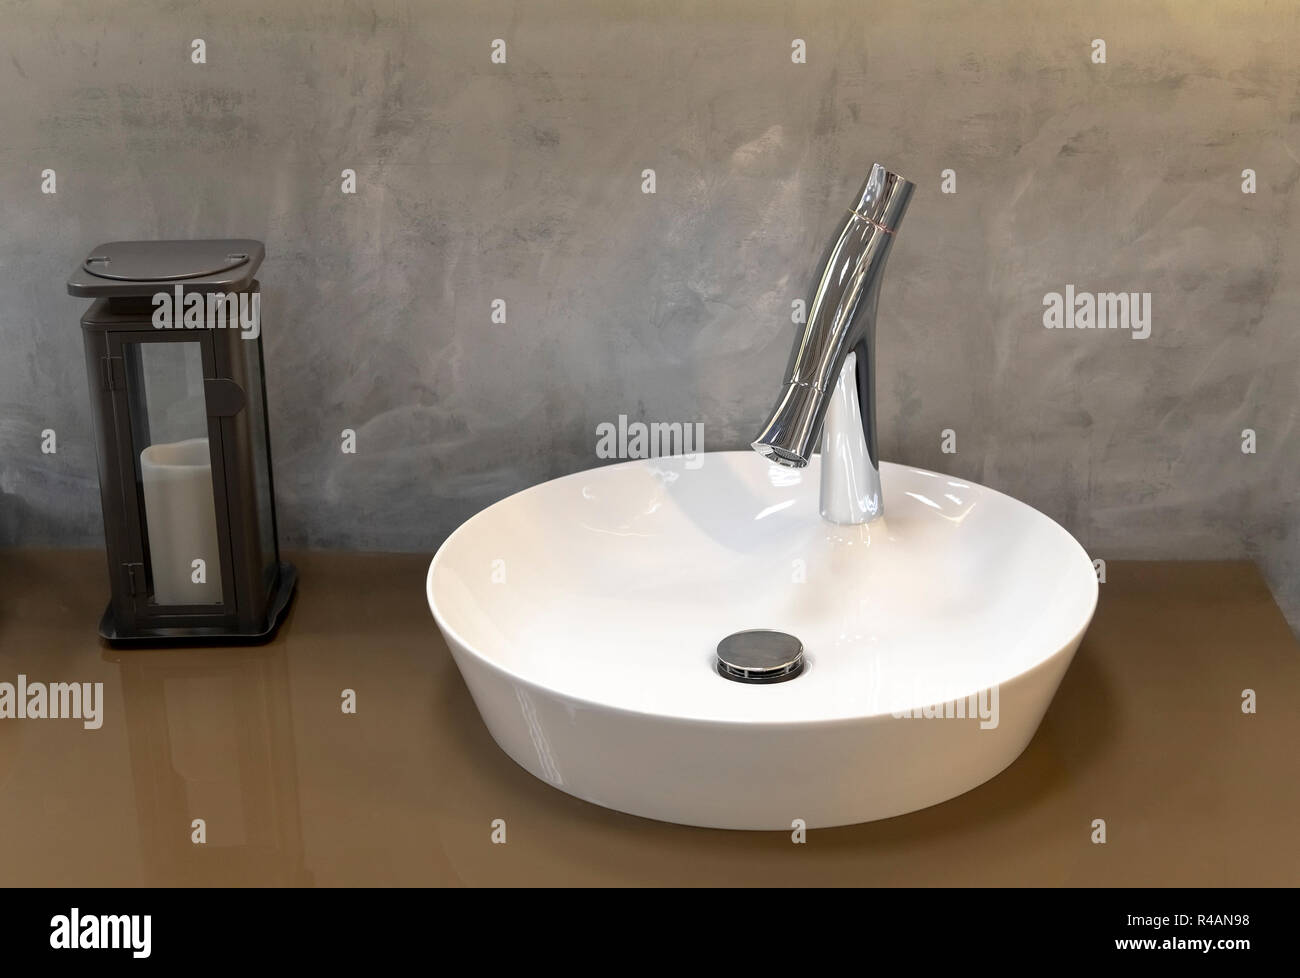 Fragment of bathroom with sink and faucet Stock Photo